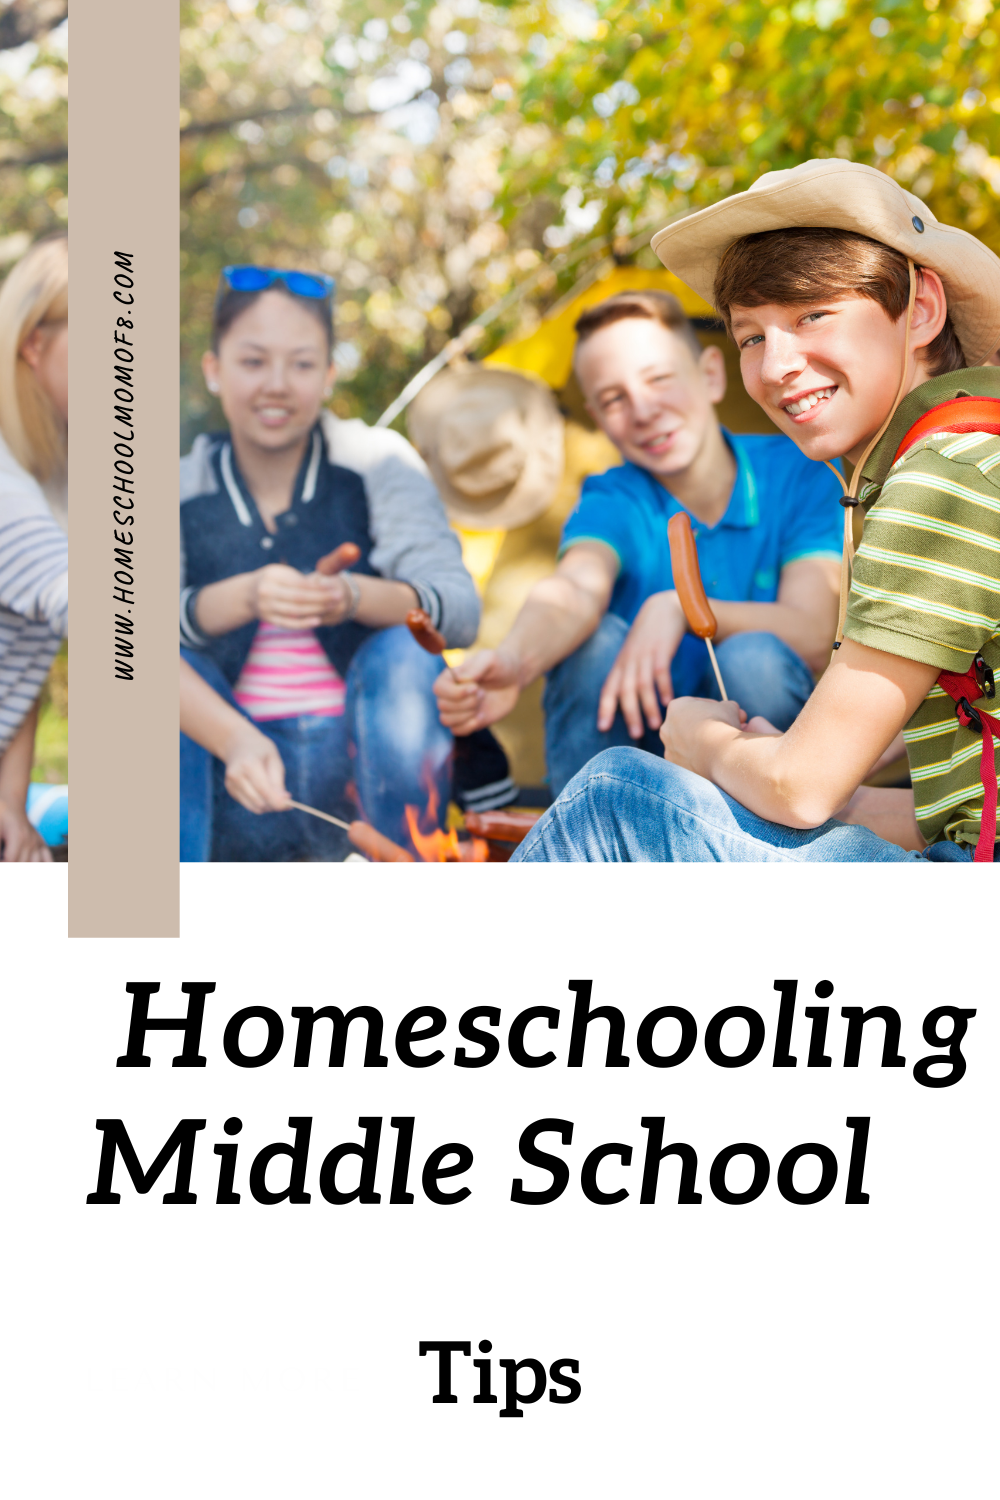 The first step to homeschooling your middle school student is teaching him responsibility for his own future success.